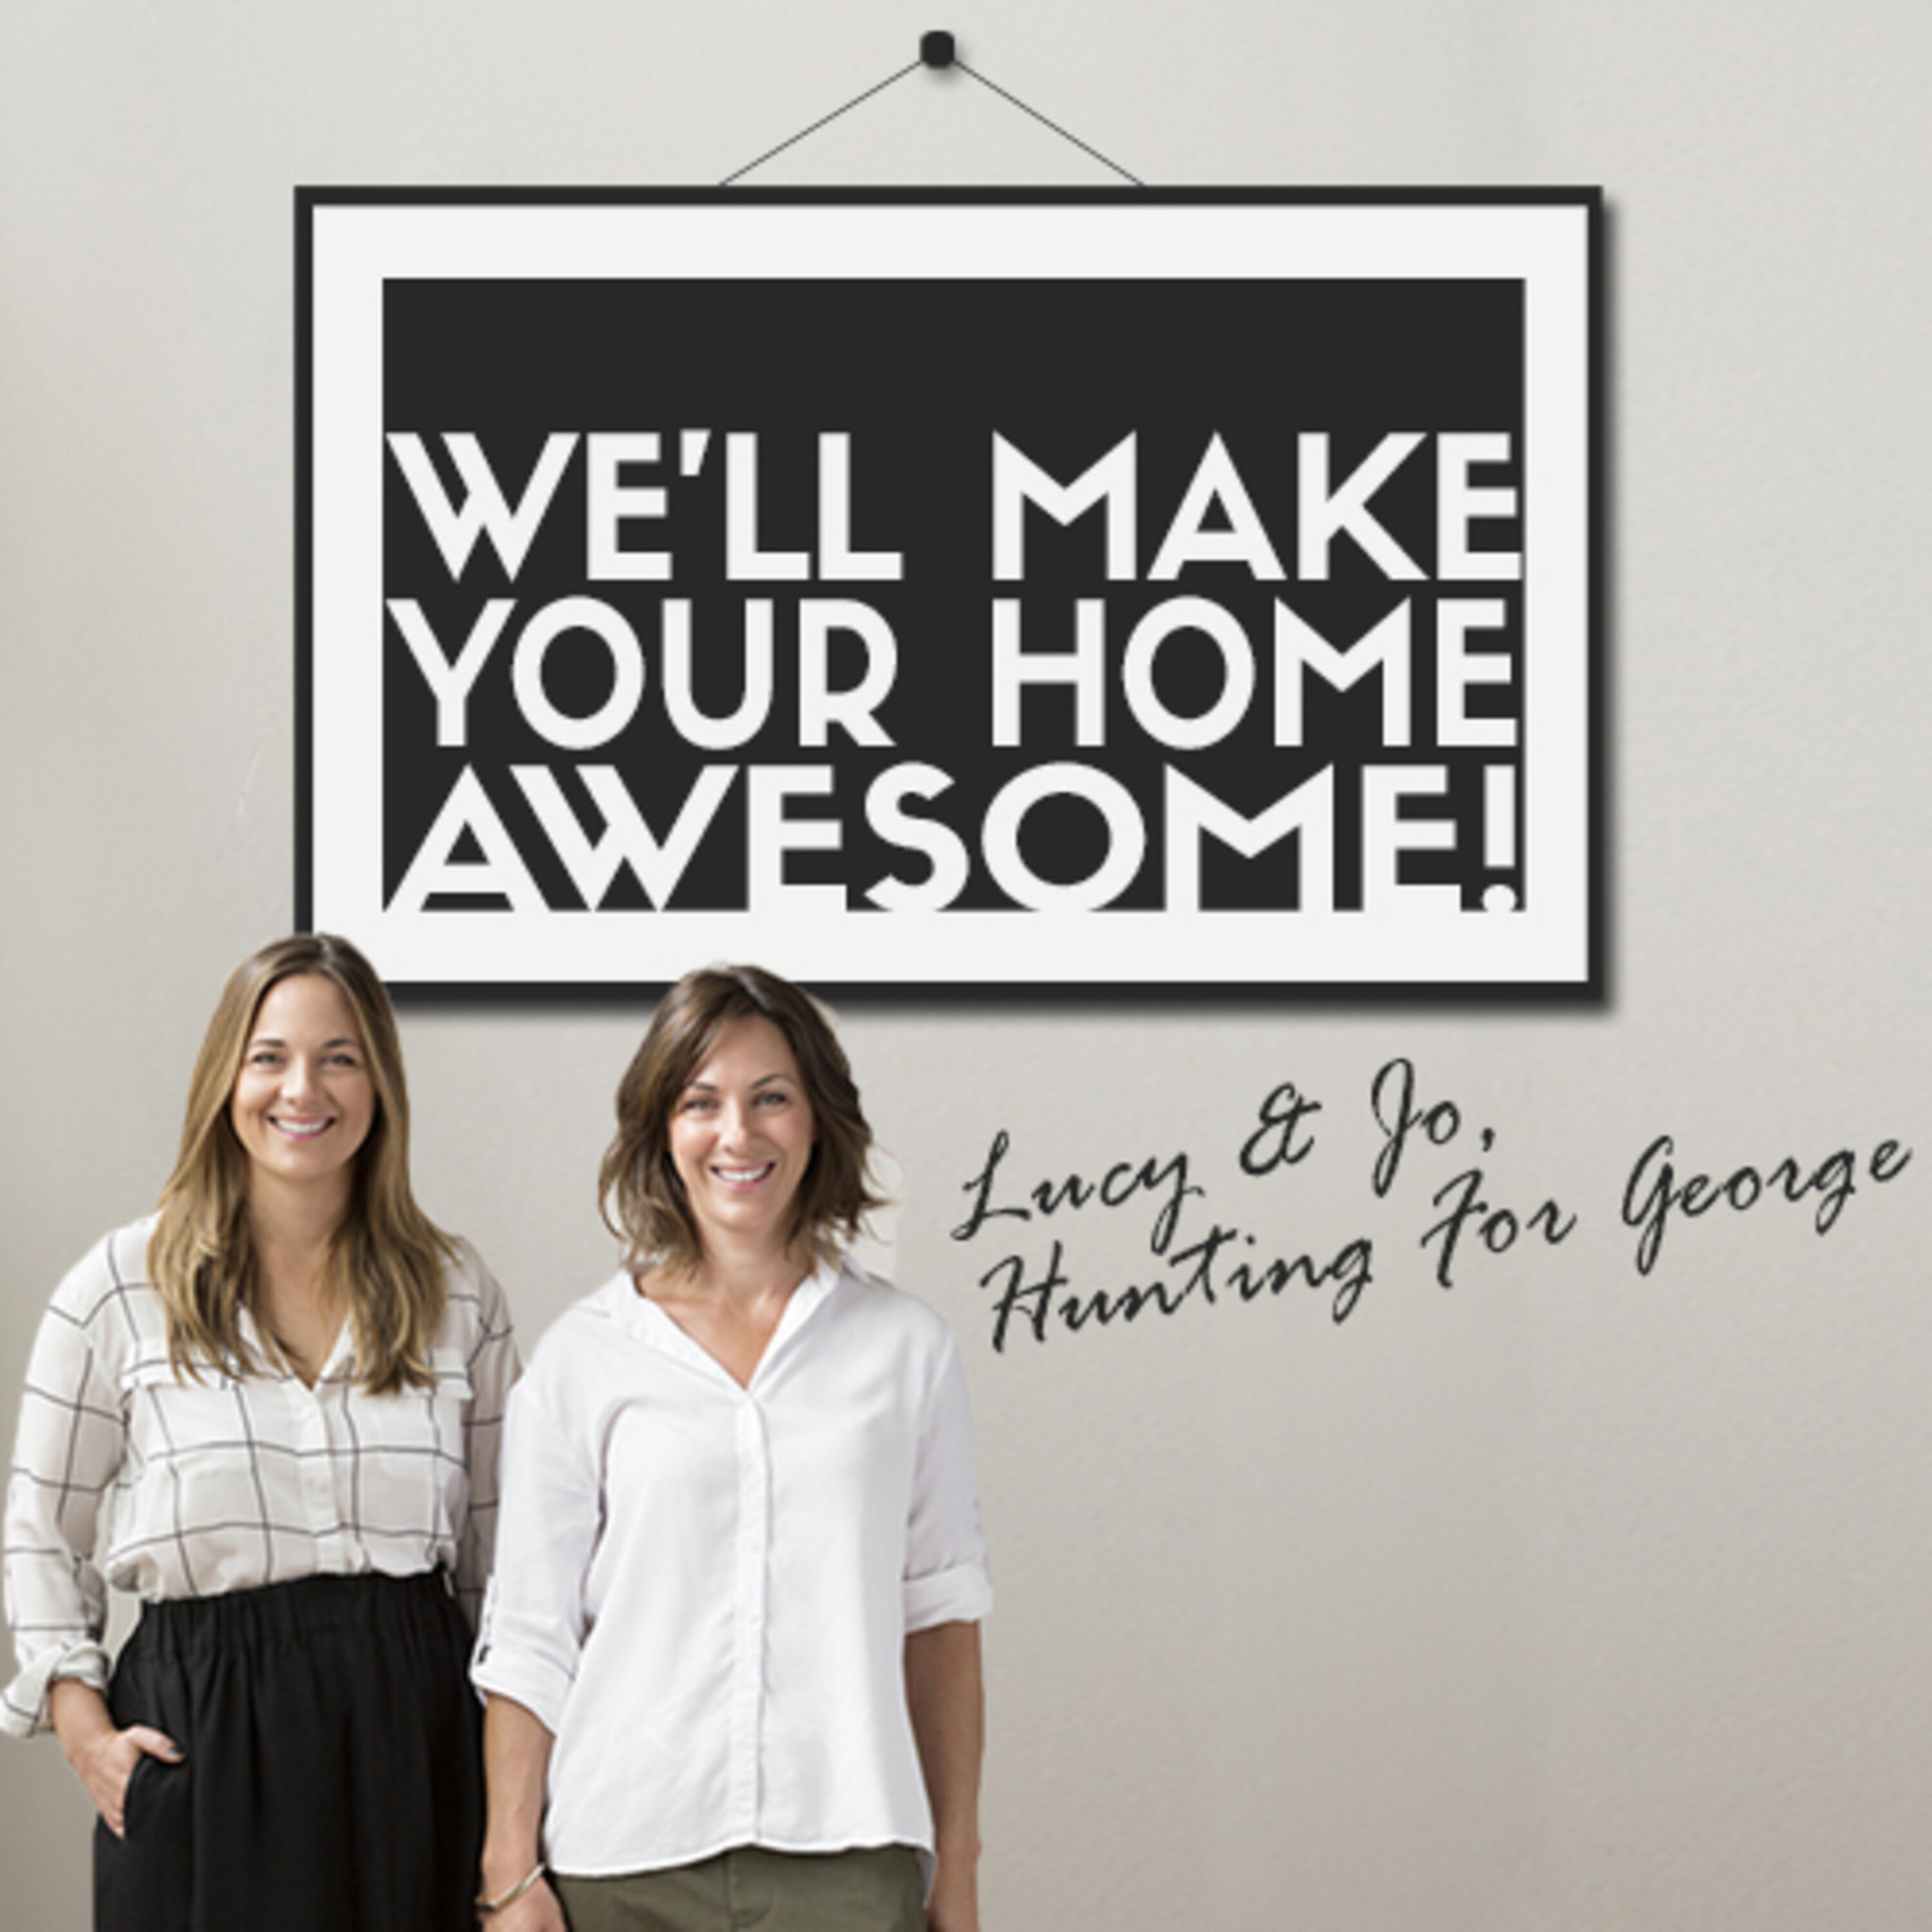 Hunting For George started as a side-hustle for sisters Jo & Lucy; seven years on it’s turning over $5M per annum | #398